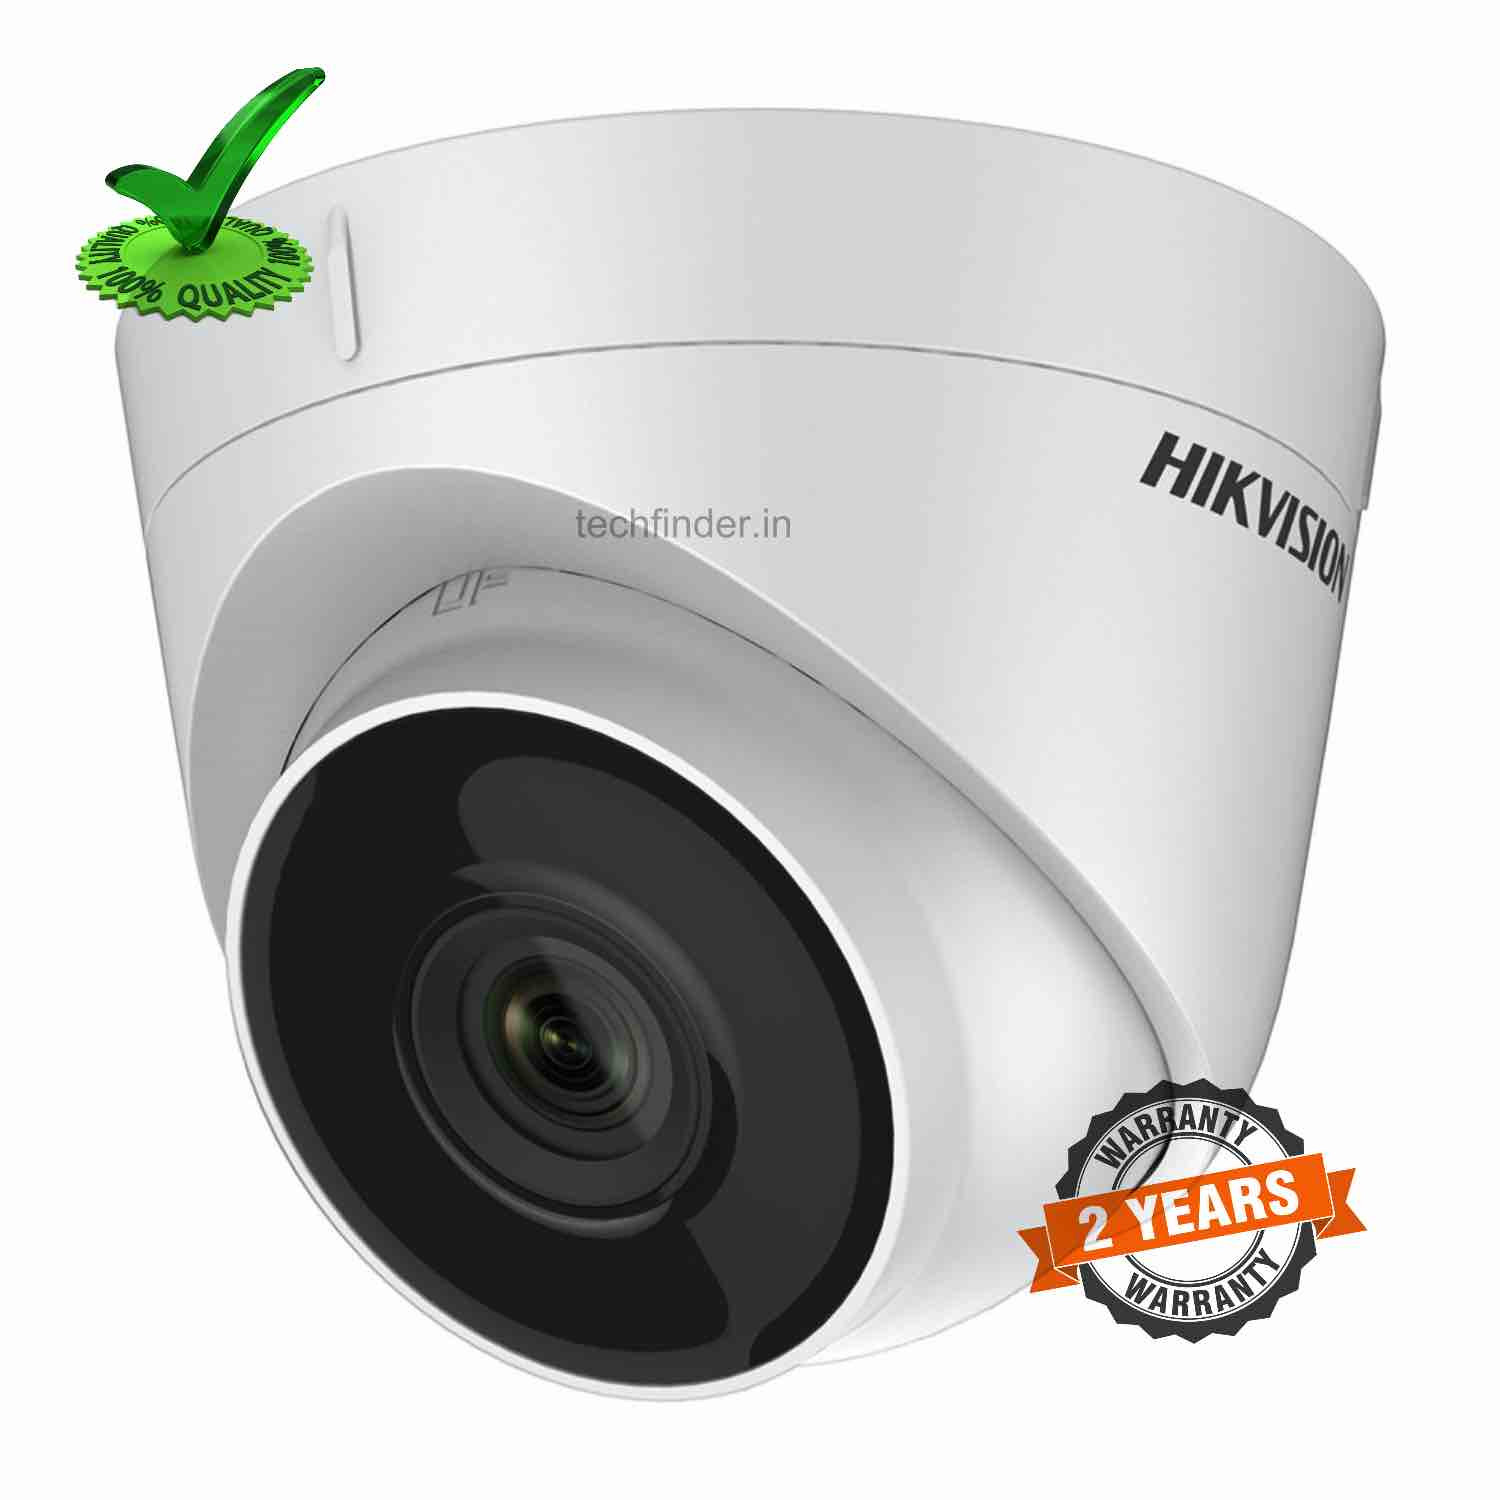 Hikvision DS-2CD1331-I 3mp Ip Ir Dome Camera